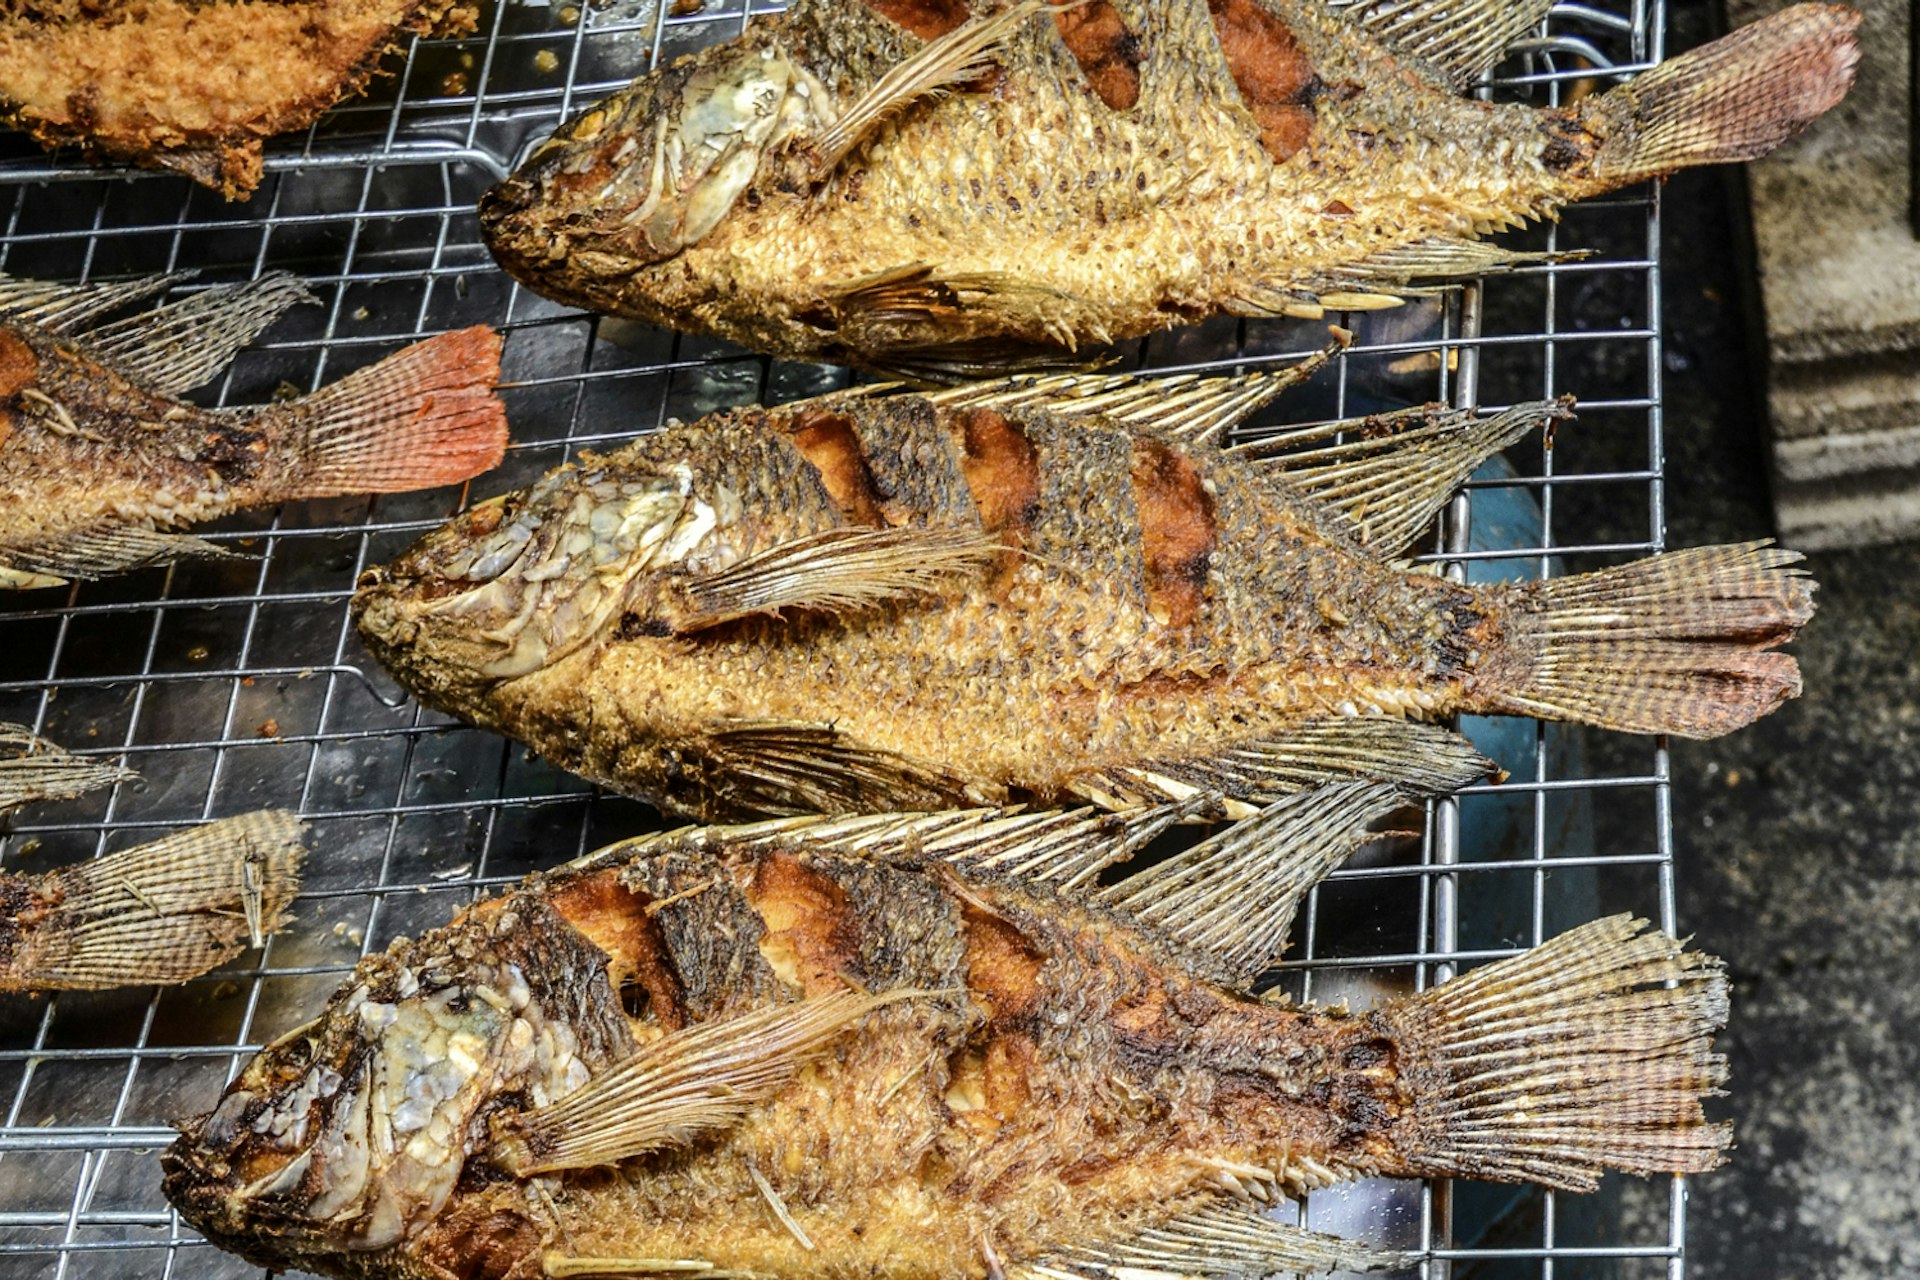 Excellent barbecued fish can be found all over Malaysia © Sam Camp / Getty Images